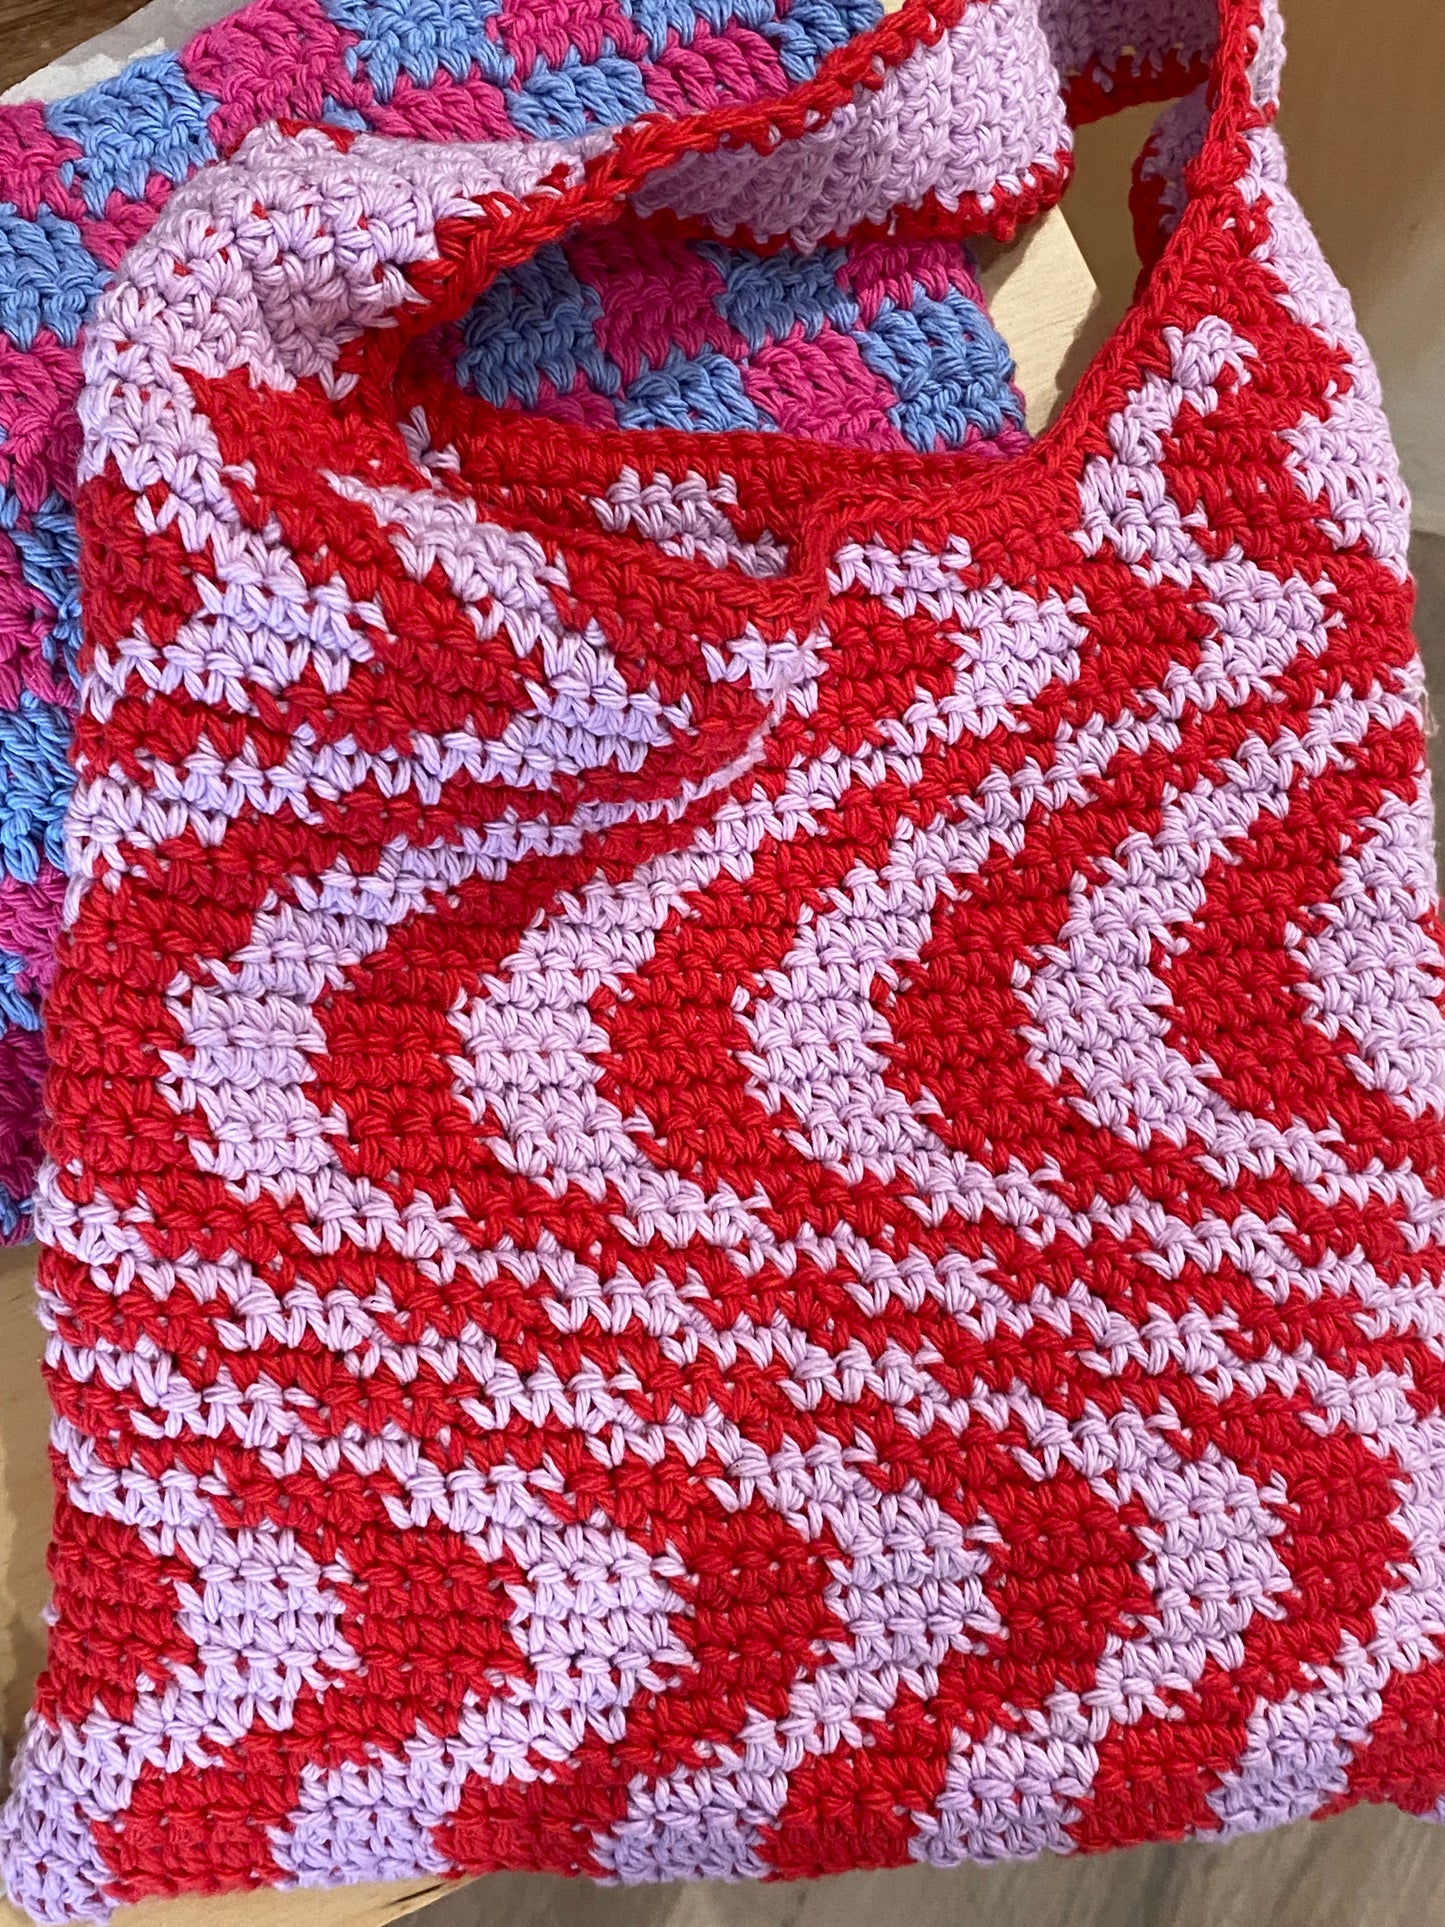 Crochet Shoulder Bag by Clever Stitches - Raspberry Wave